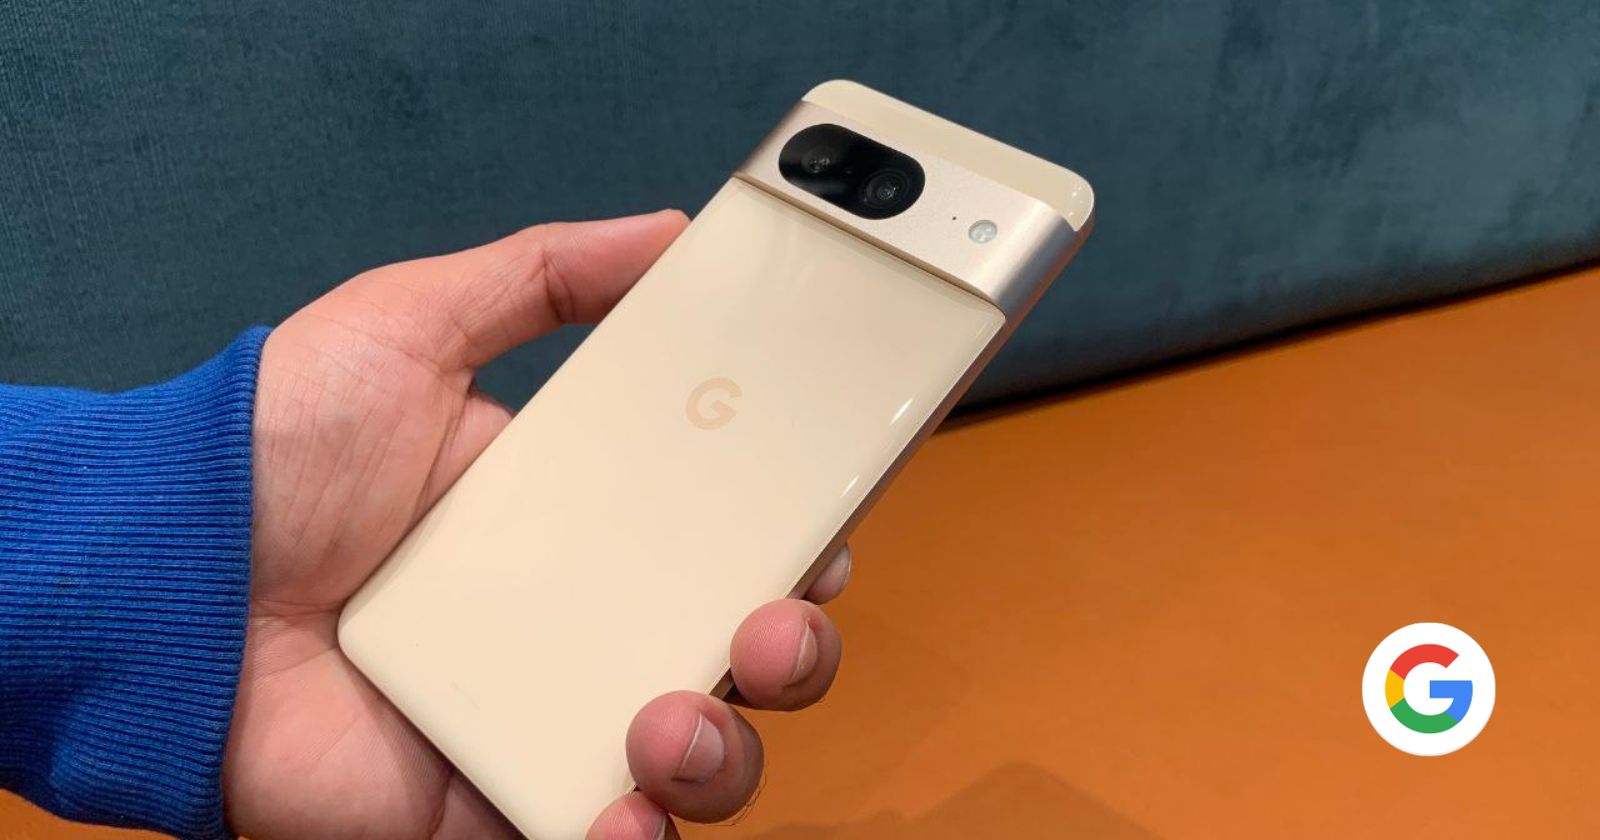 Google has filed to trademark the signature Pixel's ‘G’ logo